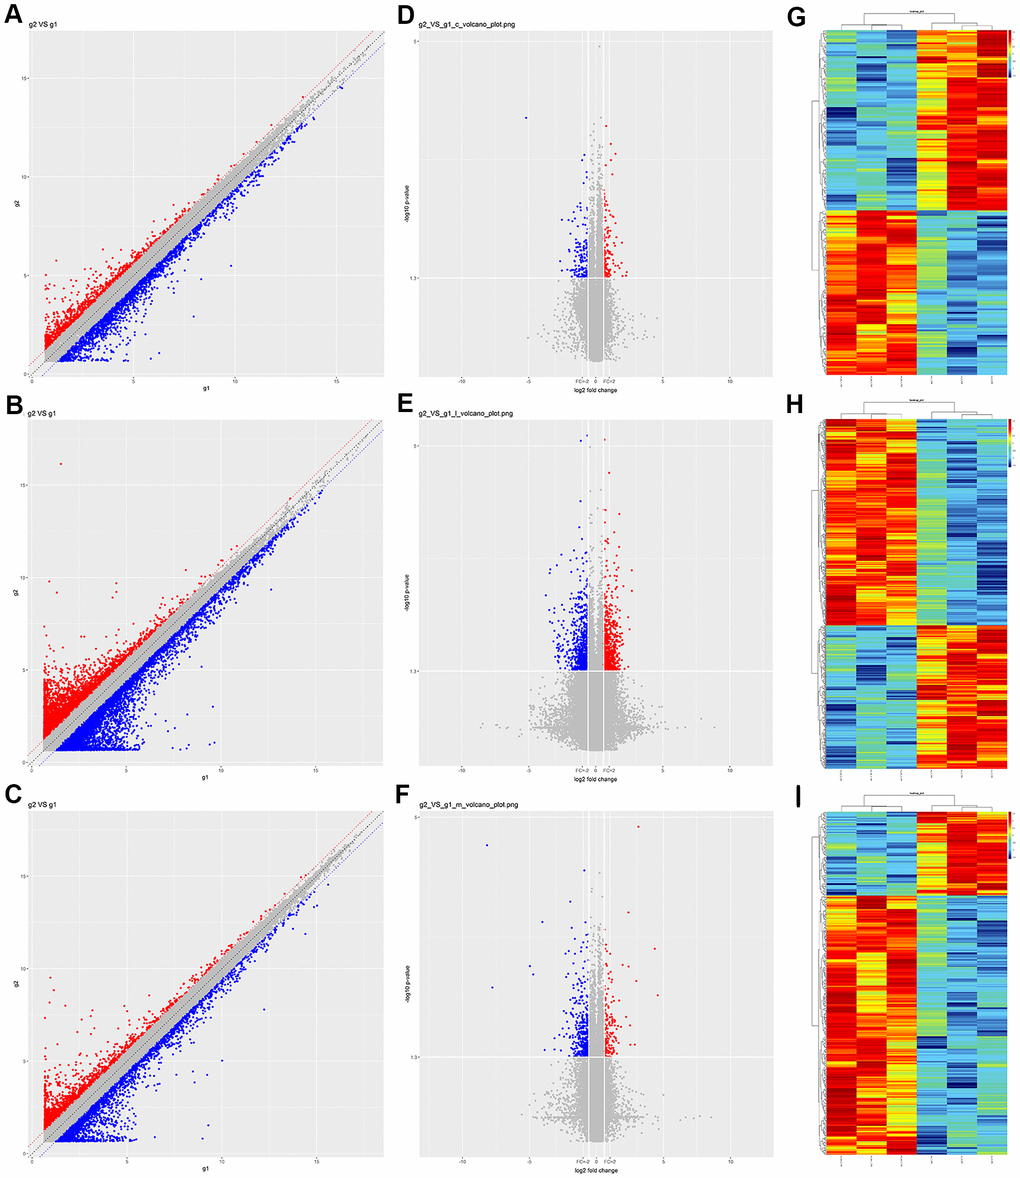 Expression profiles of circRNAs, lncRNAs and mRNAs in prefrontal cortex tissues from Nrf2 (-/-) and Nrf2 (+/+) mice. (A–C) Scatter plots showing the expression variation of circRNAs (A), lncRNAs (B) and mRNAs (C) between Nrf2 (-/-) and Nrf2 (+/+) prefrontal cortex tissues. The values of the X and Y axes in the scatter plots are the normalized signal values of the samples (log2-scaled). The red (up-regulated) and blue (down-regulated) points represent the DEcircRNAs (A), DElncRNAs (B) and DEmRNAs (C) with more than FCs > 1.5 between Nrf2 (-/-) and Nrf2 (+/+) prefrontal cortex tissues. (D–F) Volcano plots showing the differential expression of circRNAs (D), lncRNAs (E) and mRNAs (F) between Nrf2 (-/-) and Nrf2 (+/+) prefrontal cortex tissues. The vertical lines correspond to 1.5-fold upregulation and downregulation, and the horizontal line represents a p-value of 0.05. The red (up-regulated) and blue (down-regulated) points represent the DEcircRNAs (D), DElncRNAs (E) and DEmRNAs (F) with statistical significance. g1: group 1, refers to the Nrf2 (+/+) group. g2: group 2, refers to the Nrf2 (-/-) group. (G–I) Hierarchical clustering analyses were performed to depict the DEcircRANs (G), DElncRNAs (H) and DEmRNAs (I) in Nrf2 (-/-) prefrontal cortex compared with Nrf2 (+/+) prefrontal cortex tissues. The clustering analysis was used to group samples based on their expression values so that the relationships among samples could be predicted. ‘Red’ denotes high relative expression, and ‘green’ denotes low relative expression.